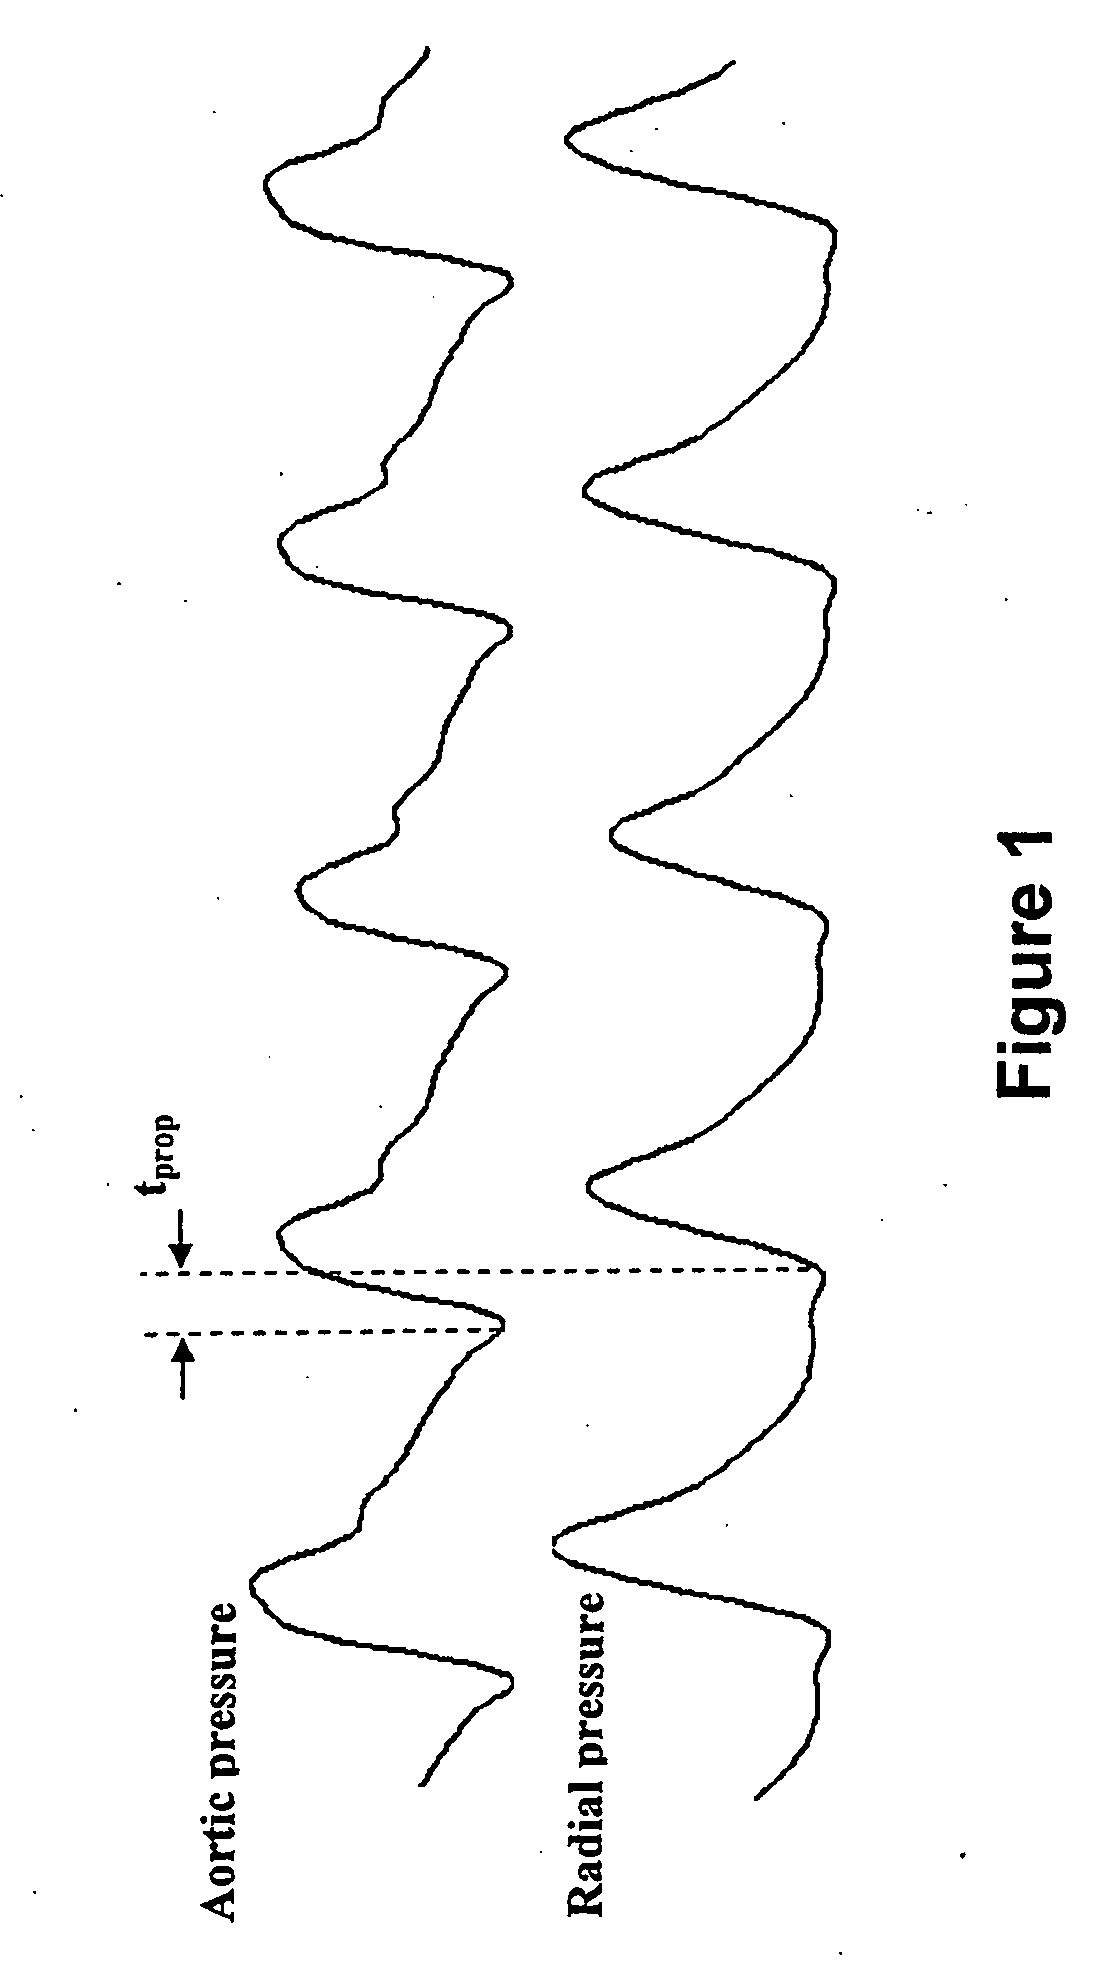 Method and apparatus for continuous assessment of a cardiovascular parameter using the arterial pulse pressure propagation time and waveform